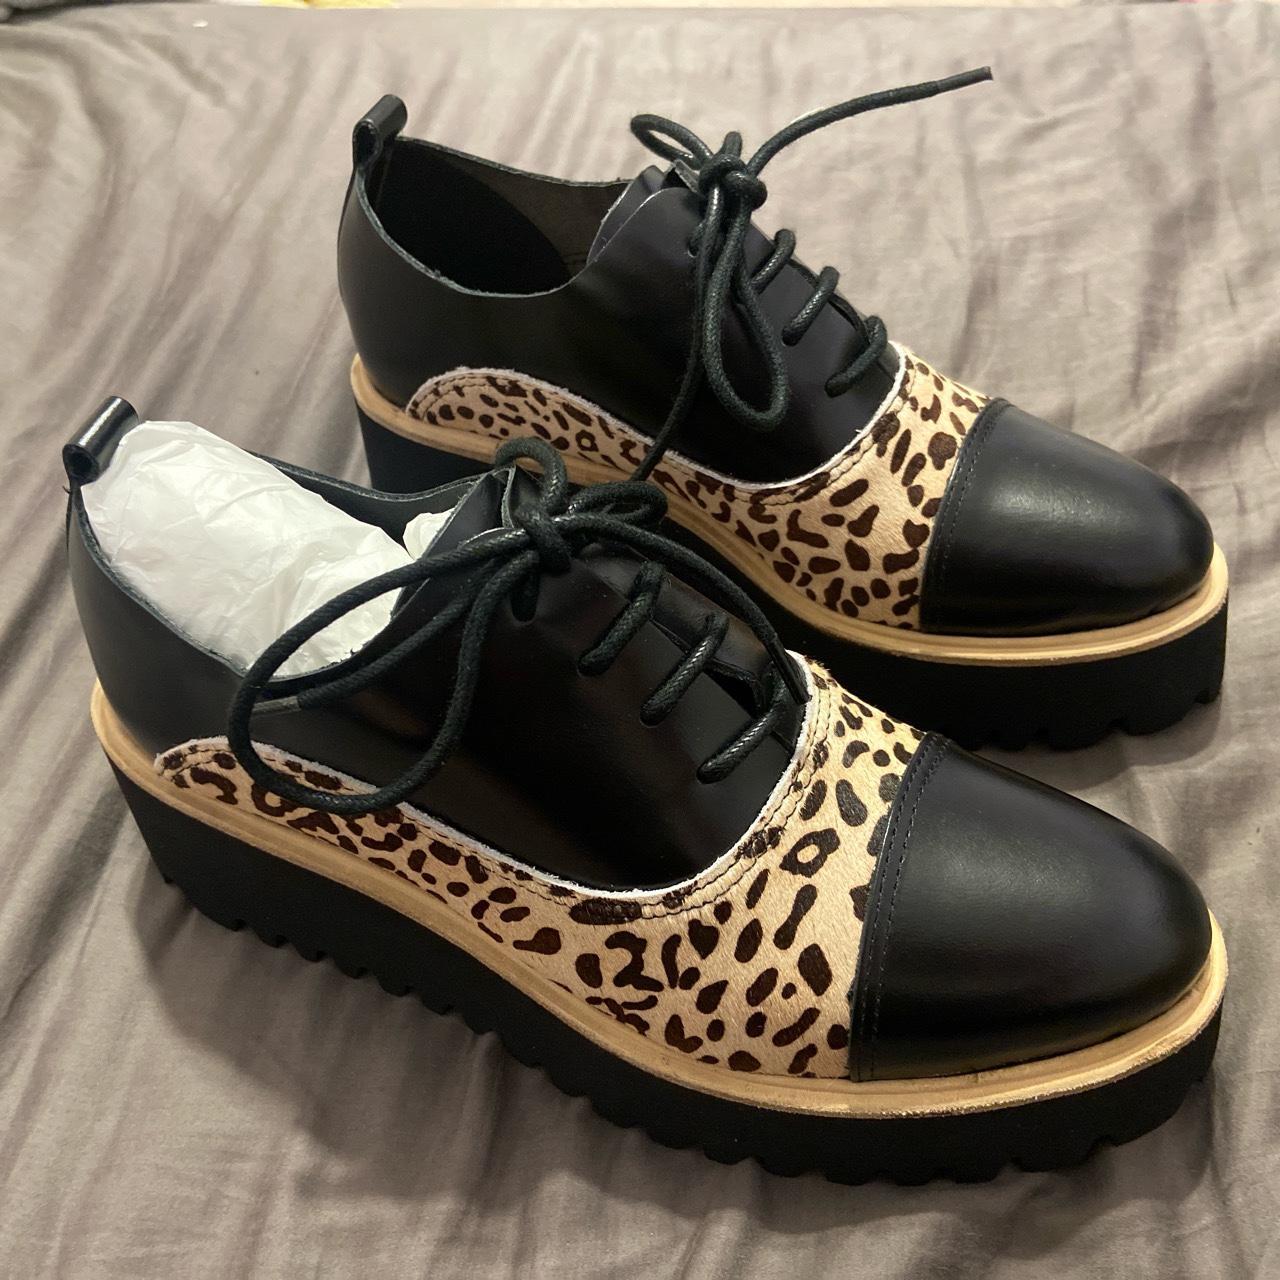 All Black Women's Tan and Black Oxfords (2)